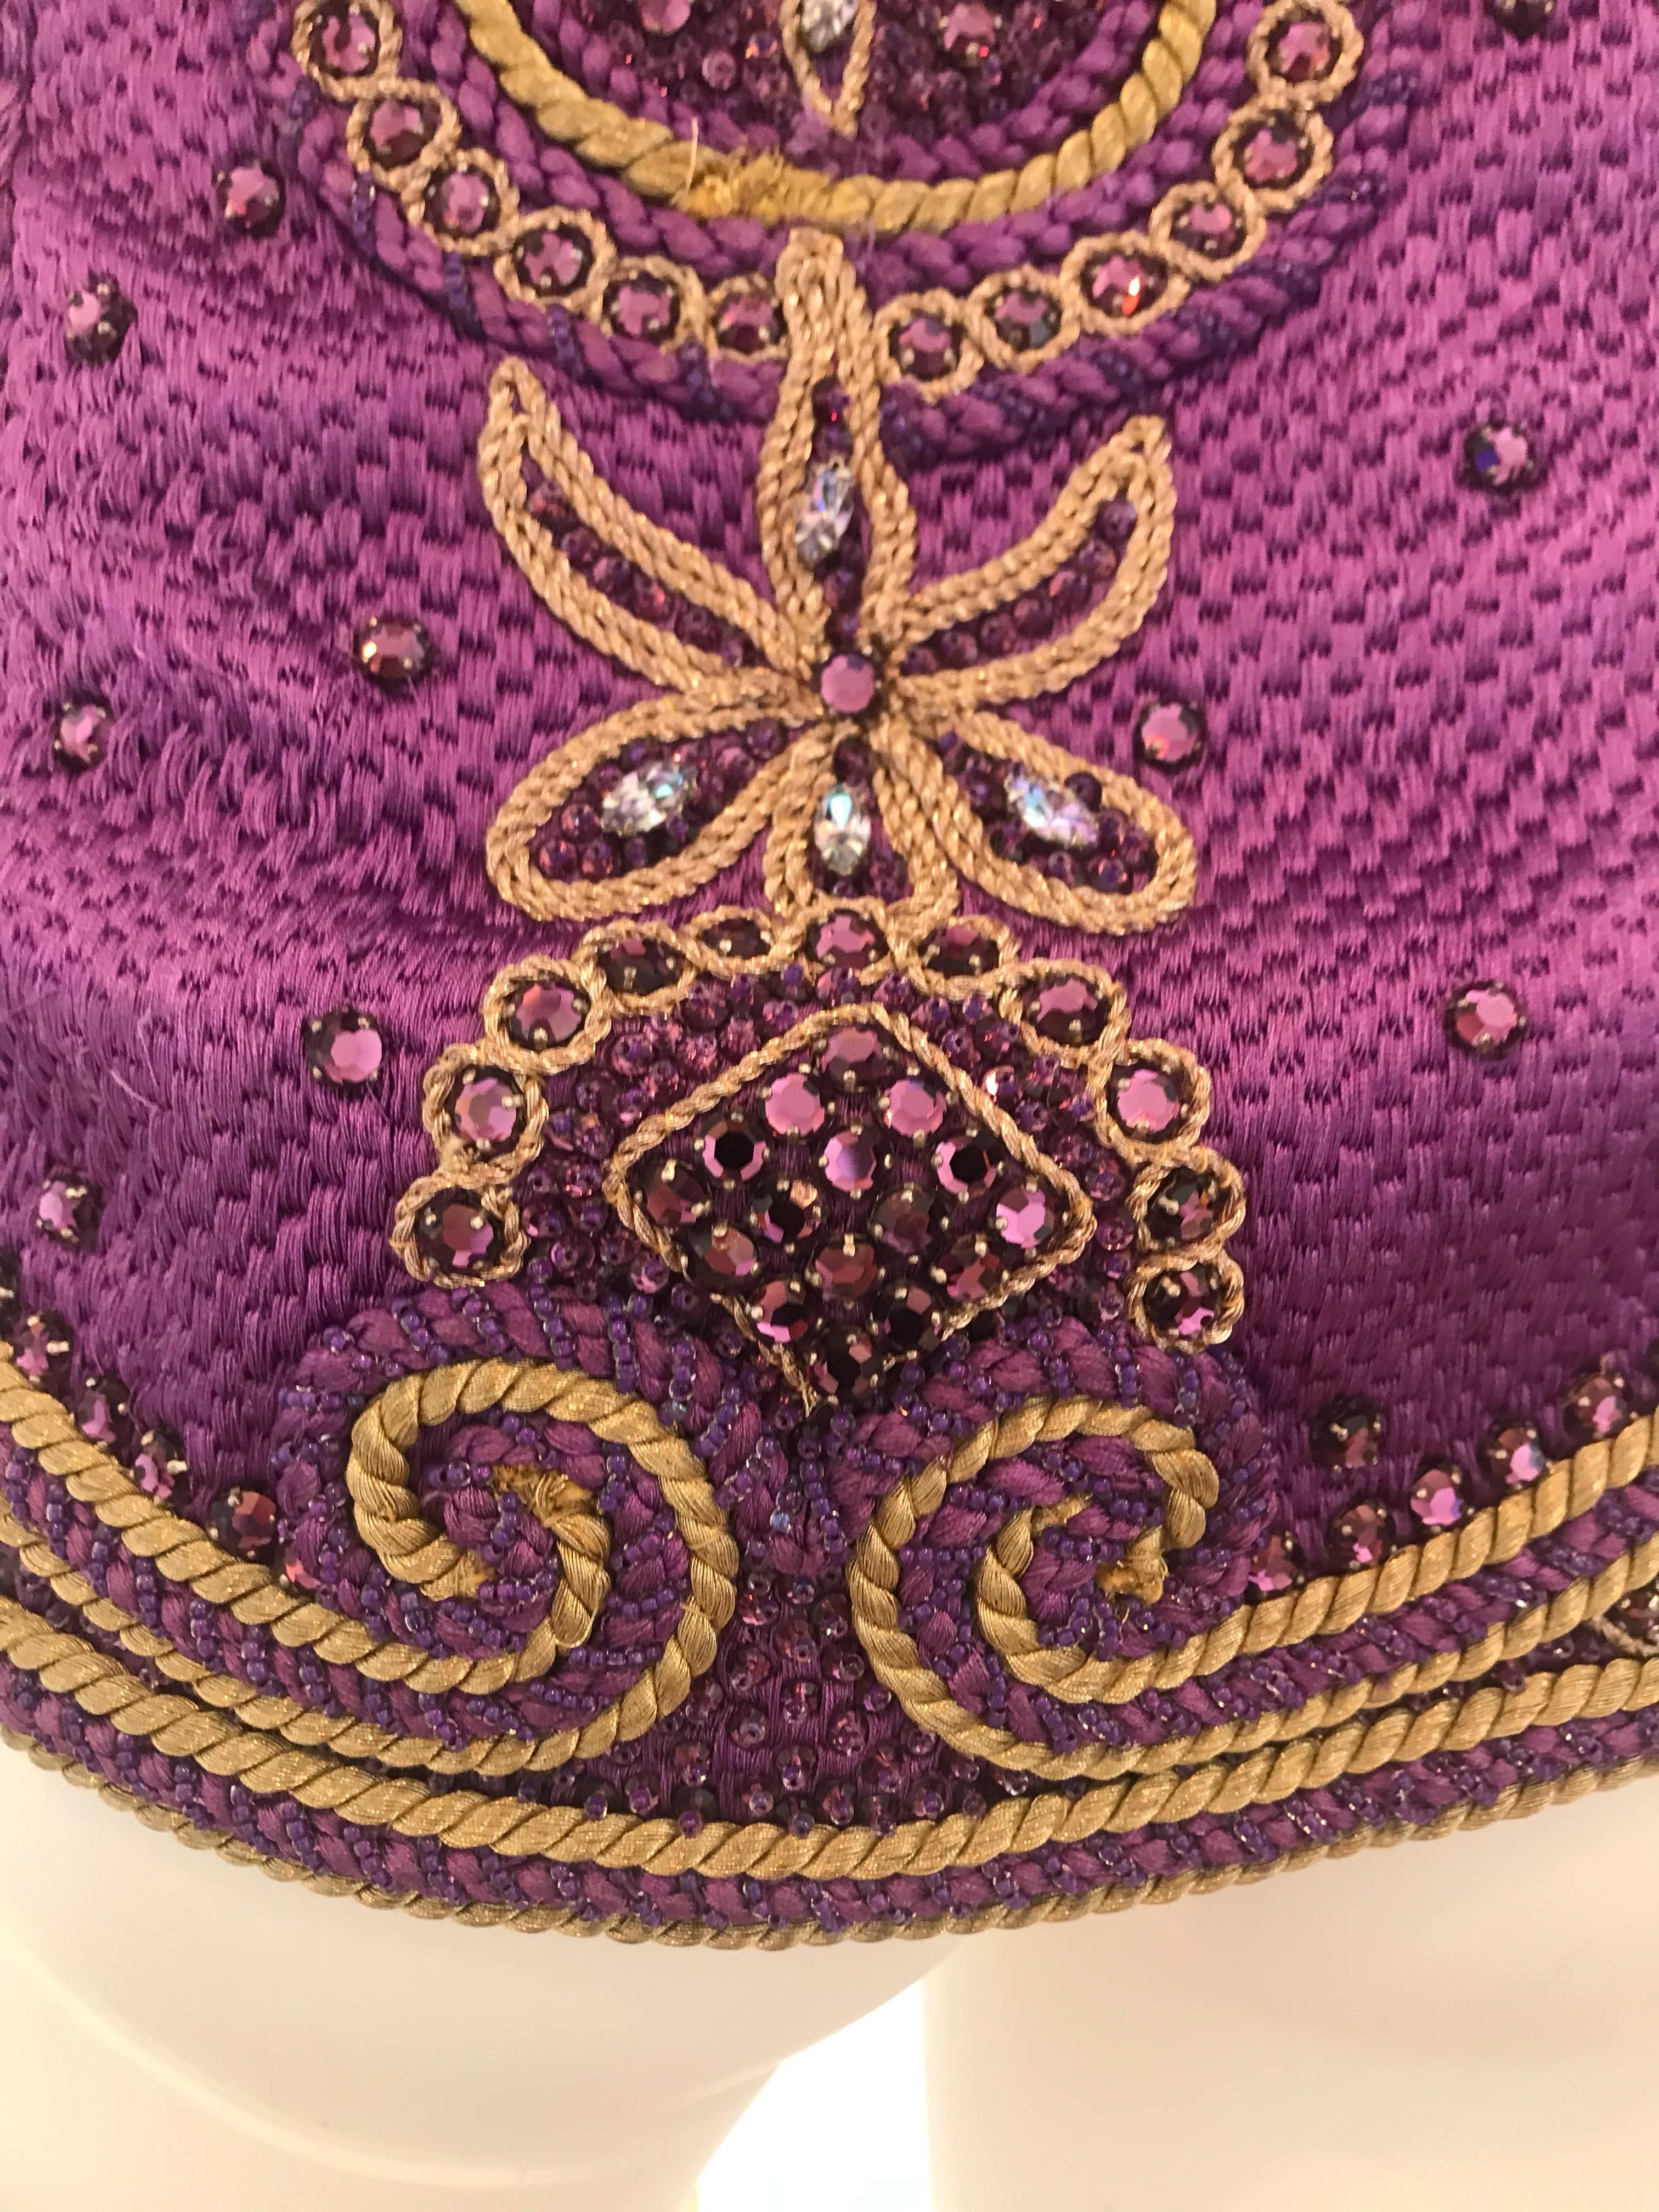 Women's Gianni Versace Couture Purple & Gold Embellished & Embroidered Bustier/Corset For Sale